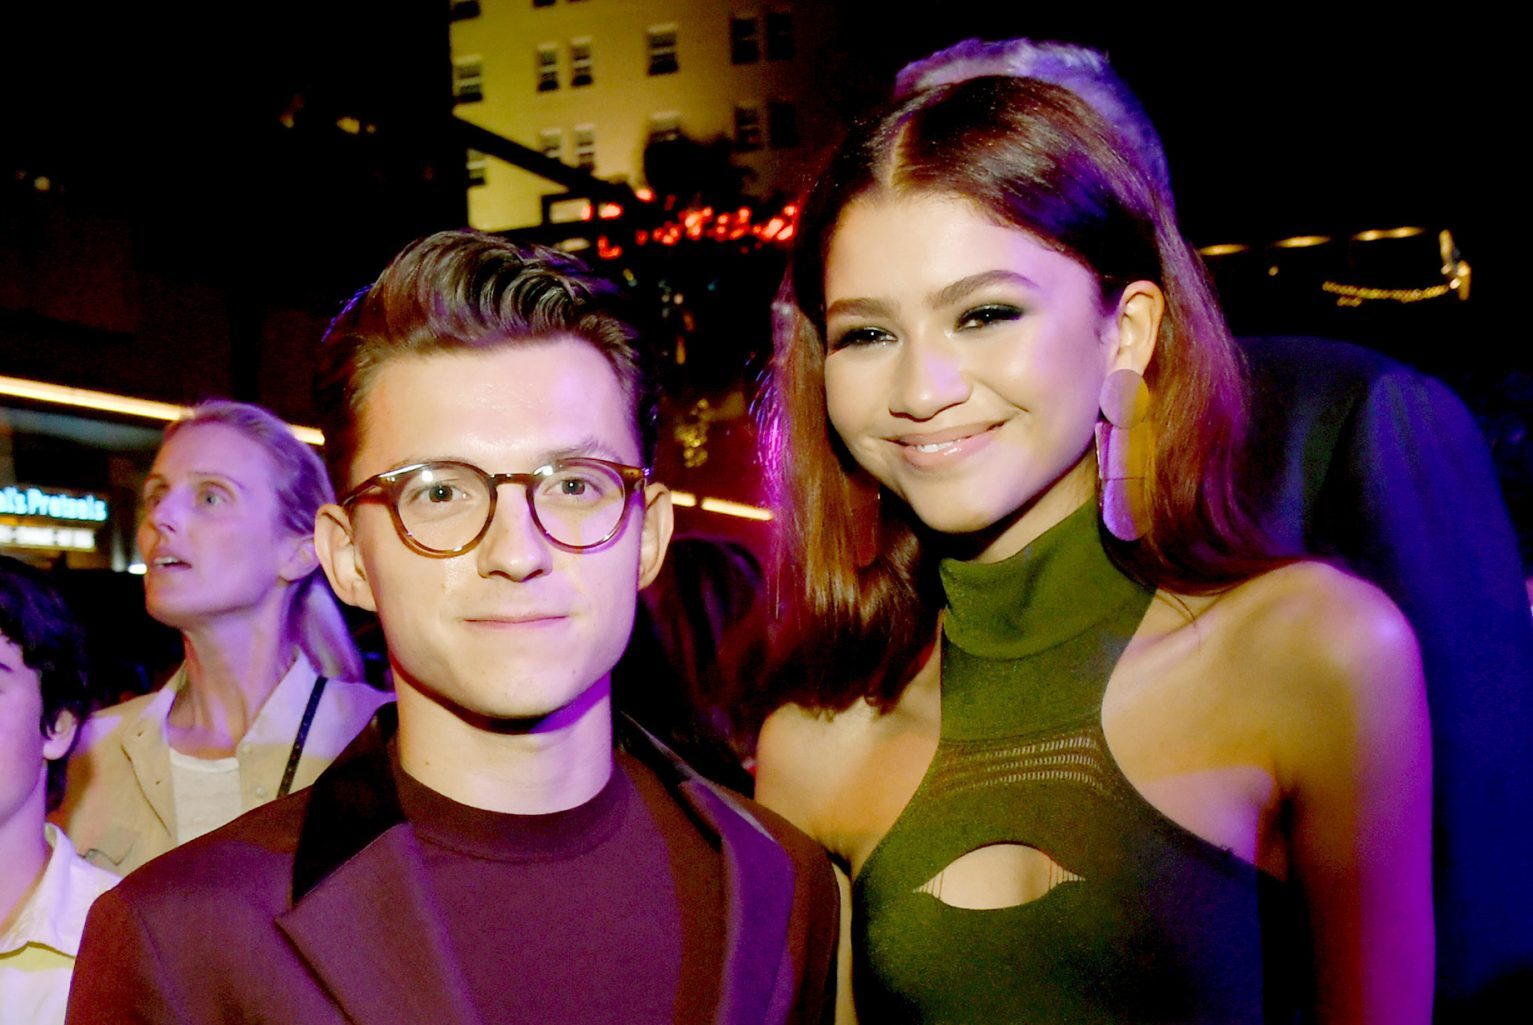 Tom Holland Reveals Why Him and Zendaya Keep Their Relationship Private